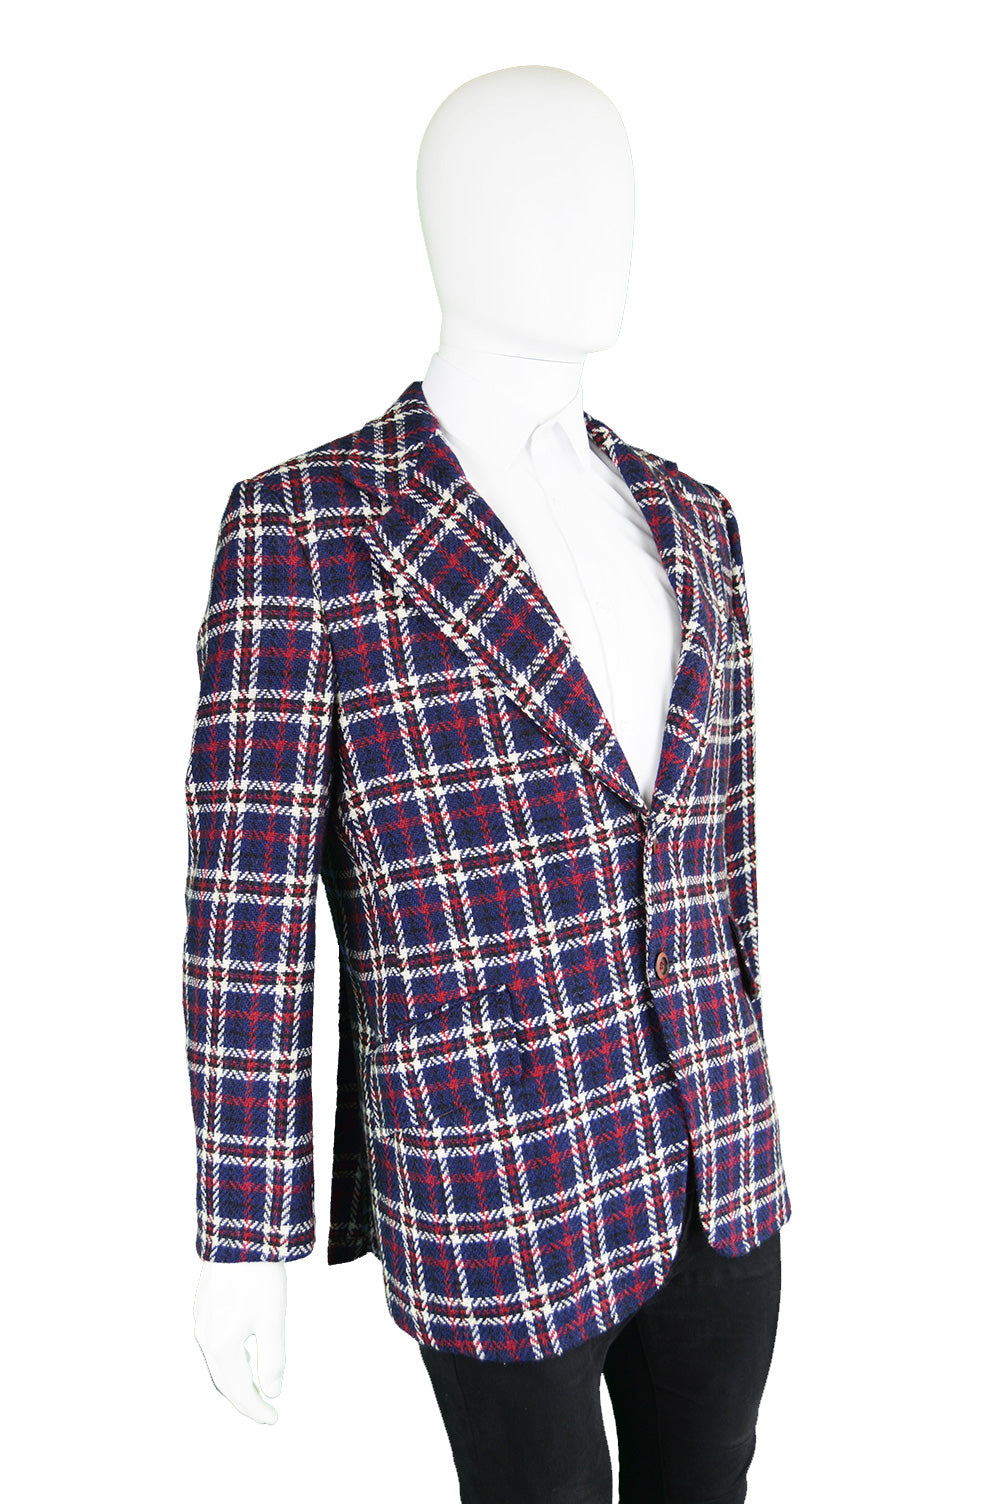 Preowned Blue, White & Red Vintage Checked Jacket, 1960s